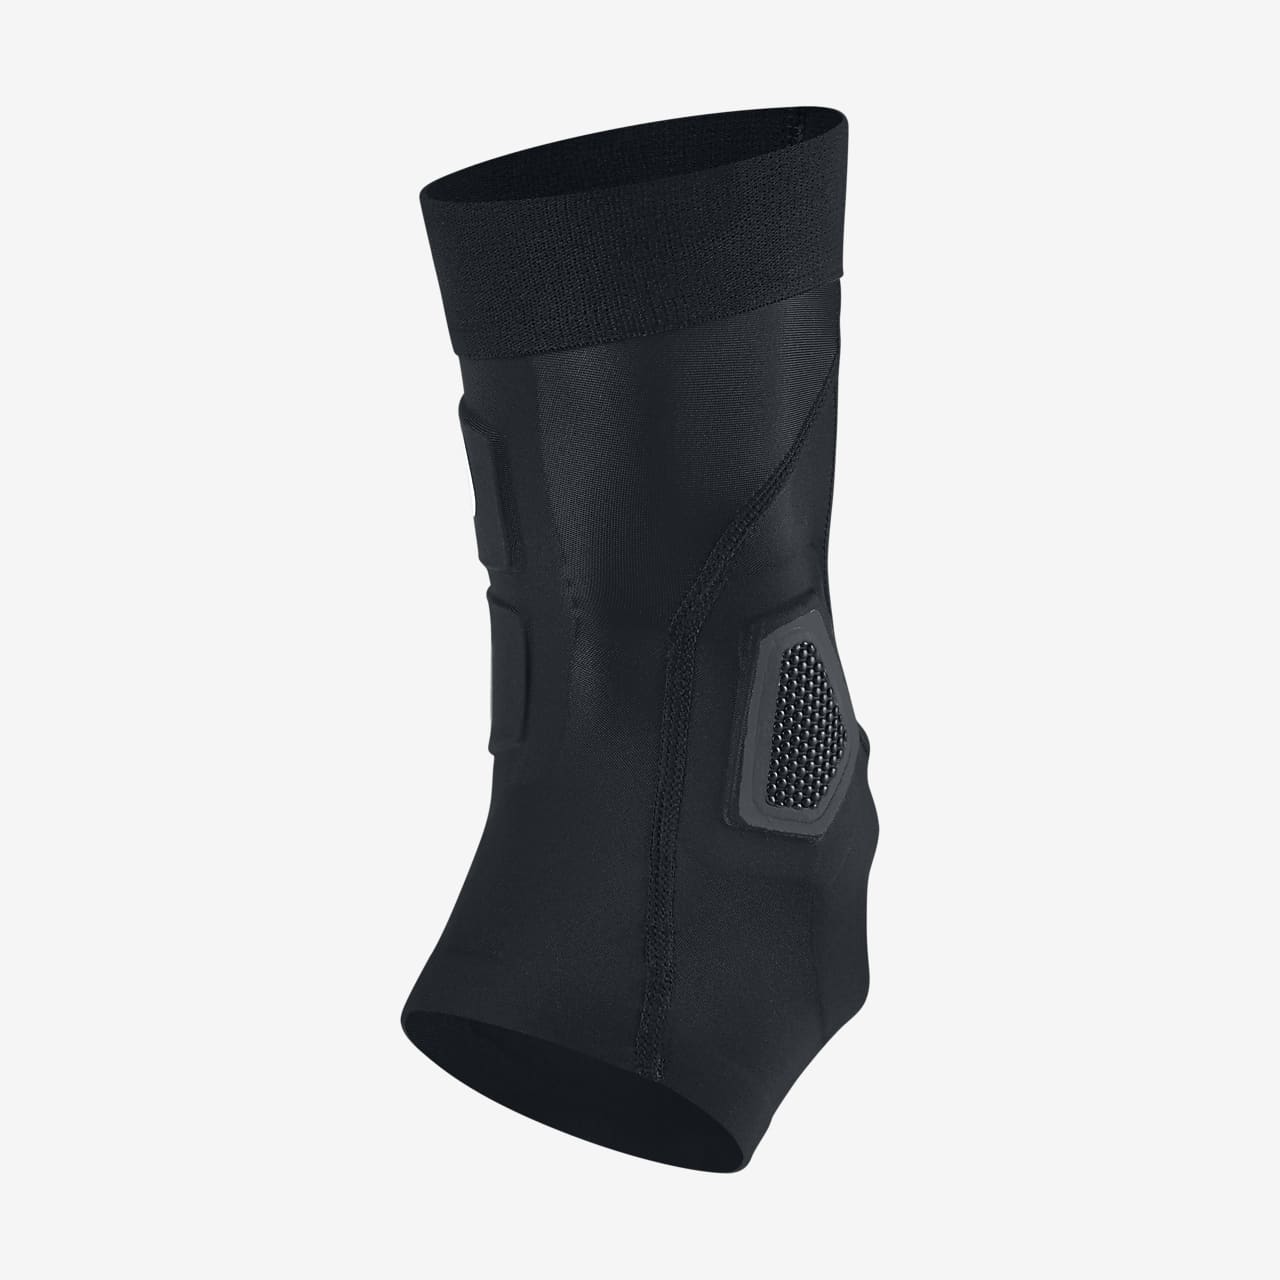 nike hyperstrong ankle sleeve